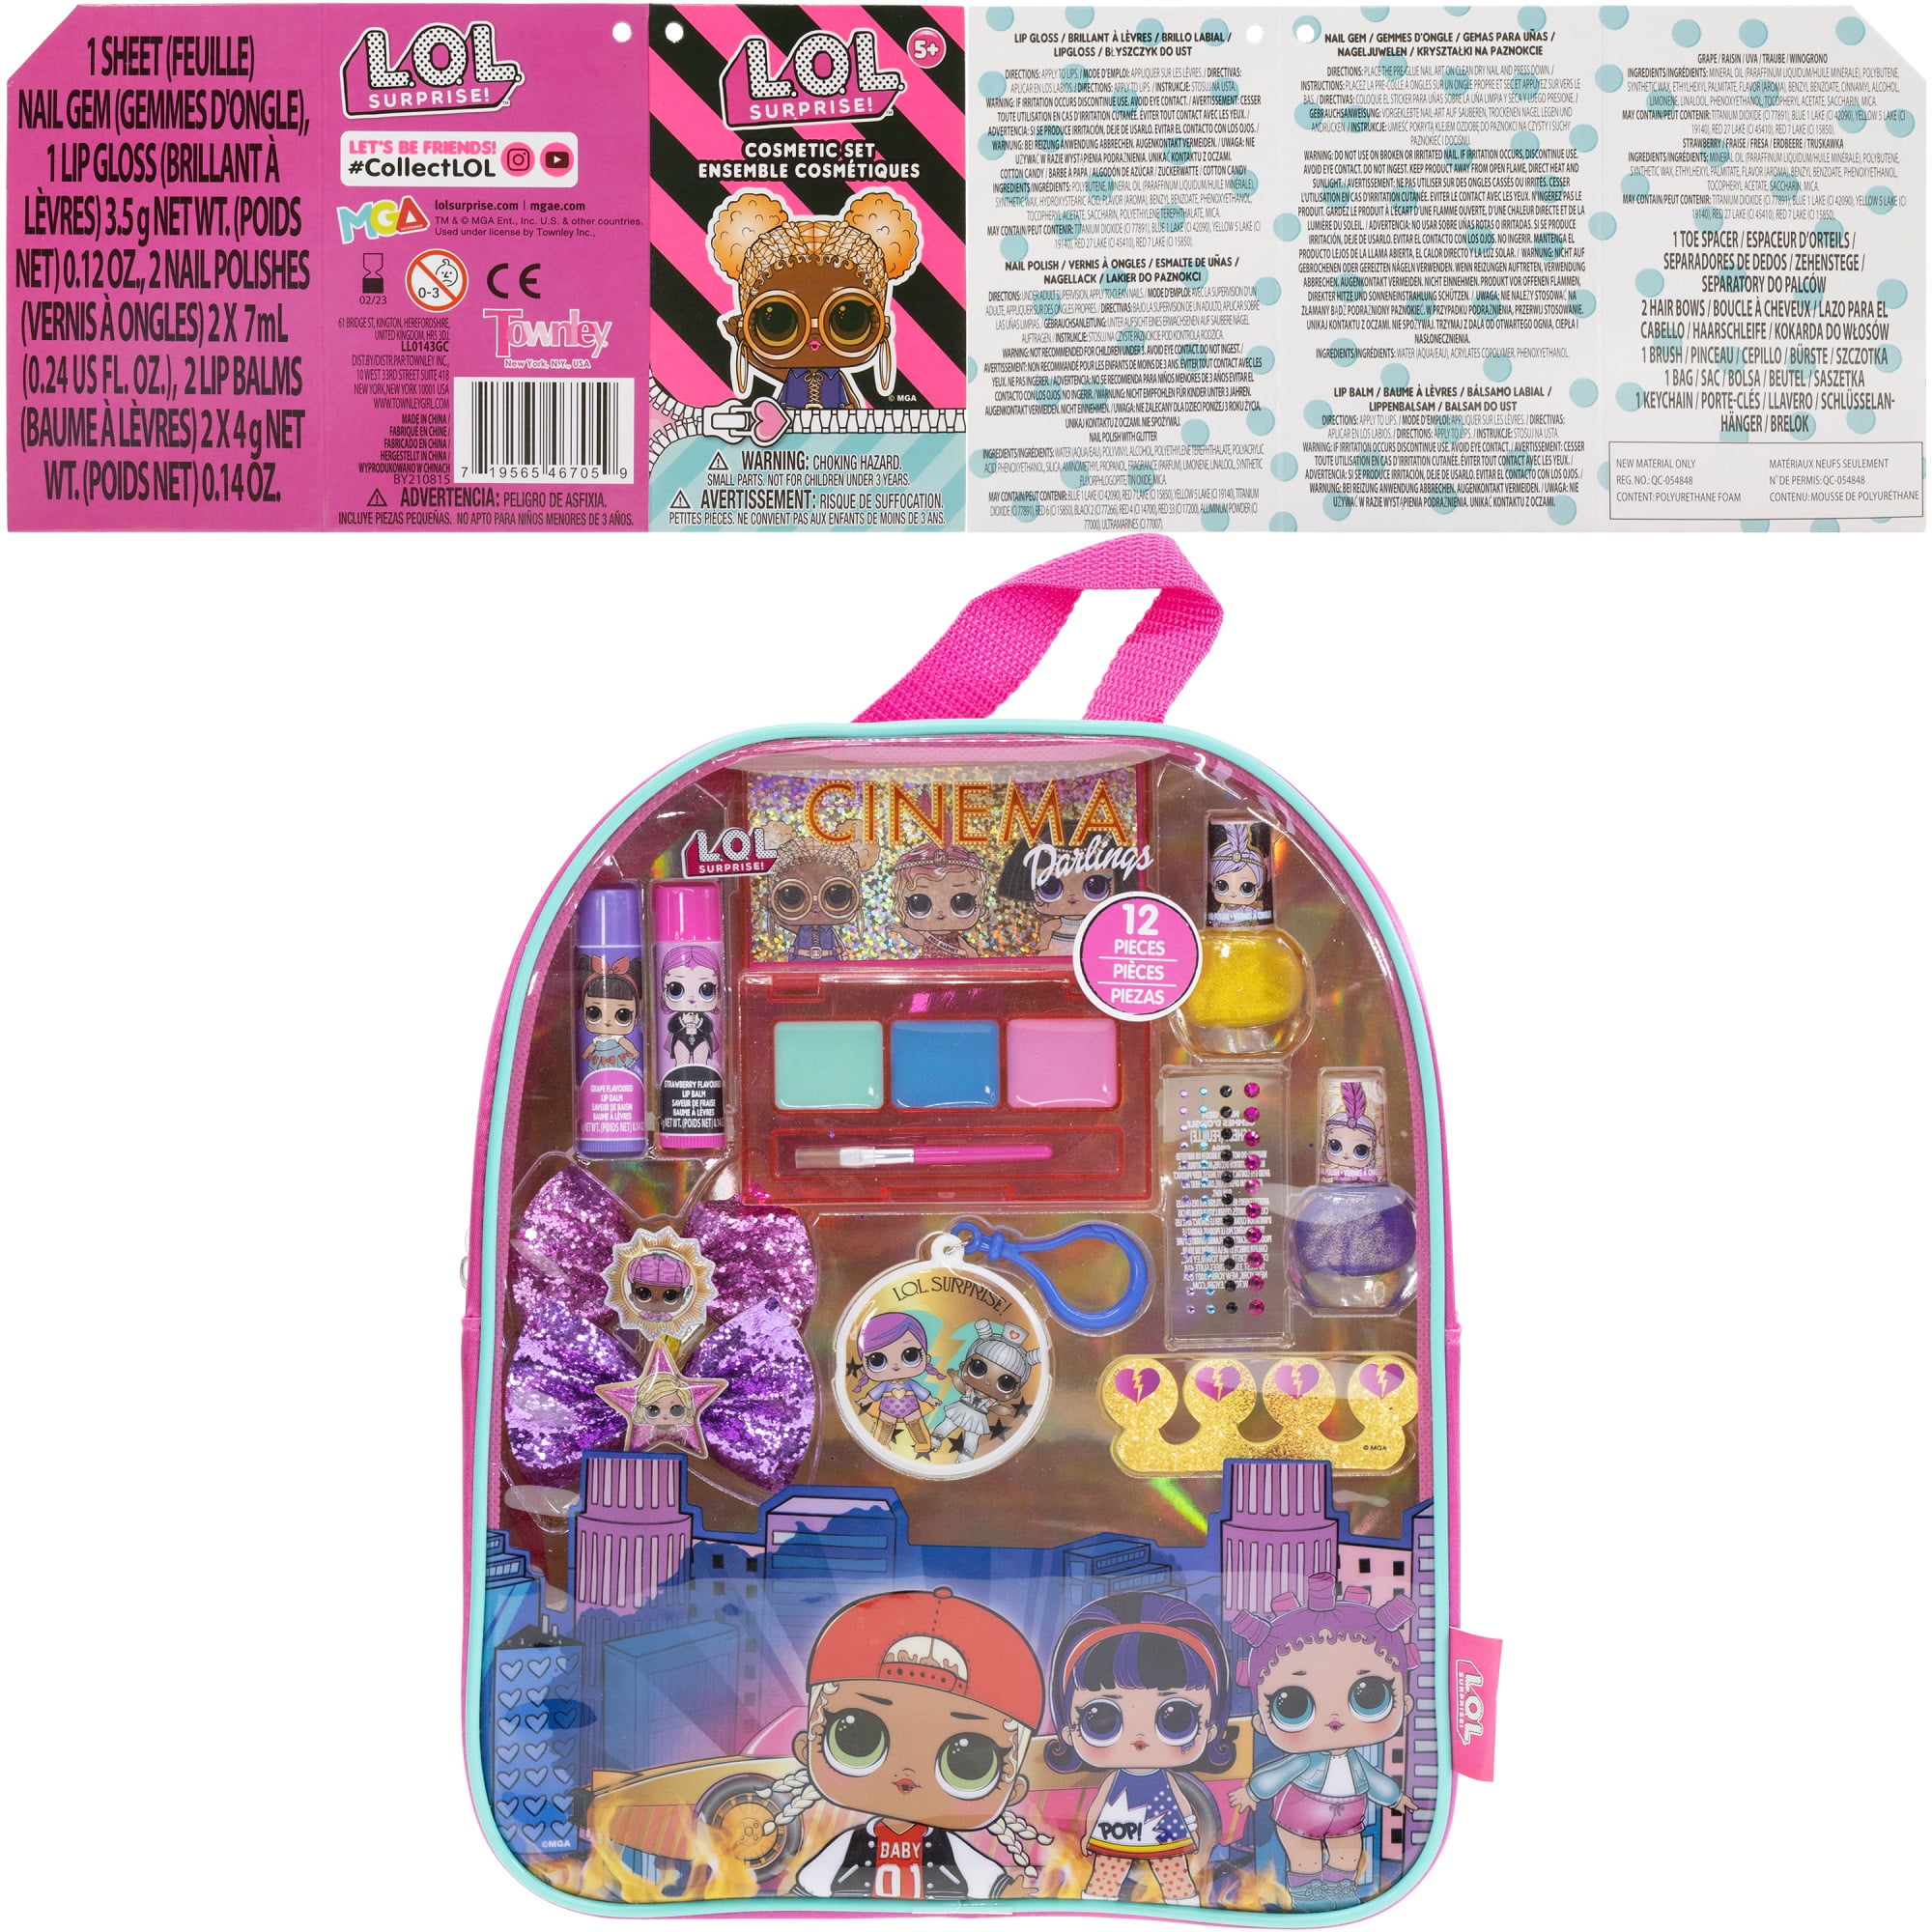 L.O.L Surprise! Townley Girl Backpack Beauty Cosmetic Make-Up Set, Pretend Play Toy and Gift for Girls Ages 5+, 11 ct, Other